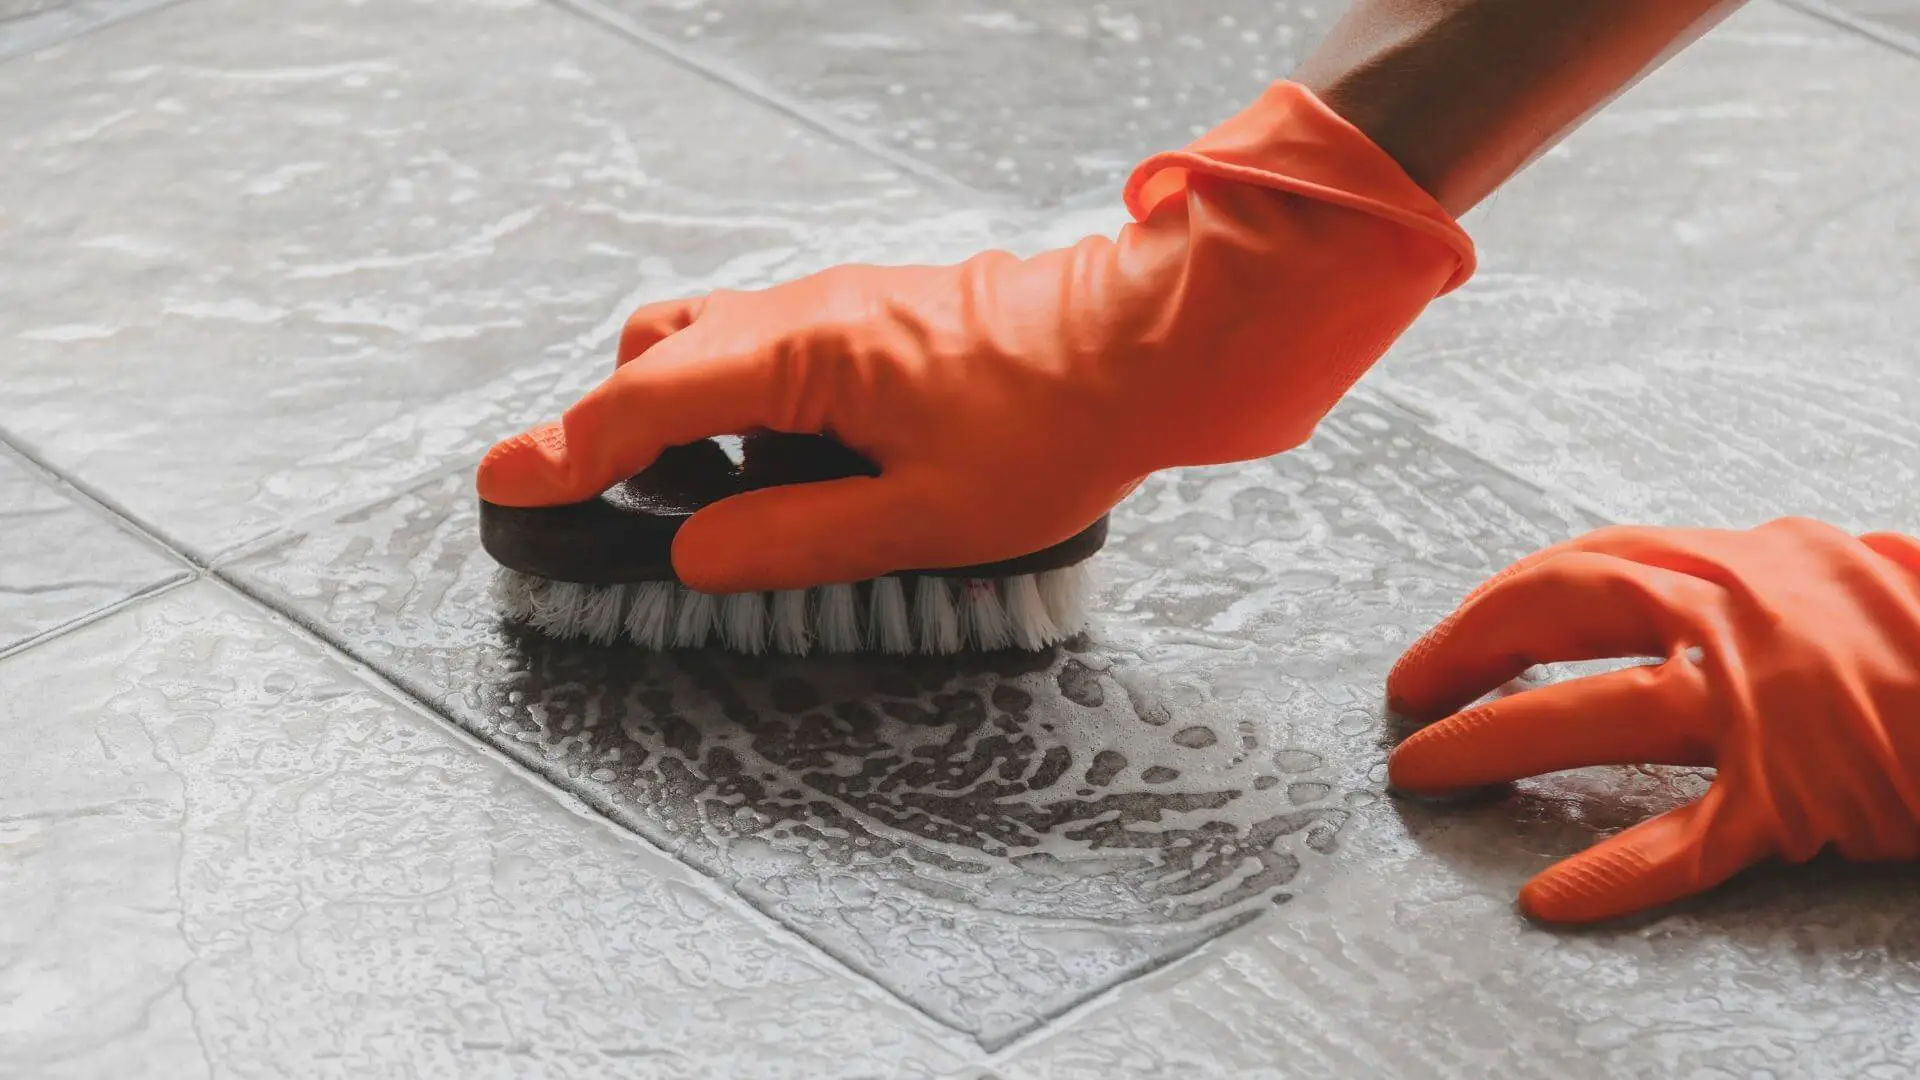 How do you remove scuff marks from floor tiles